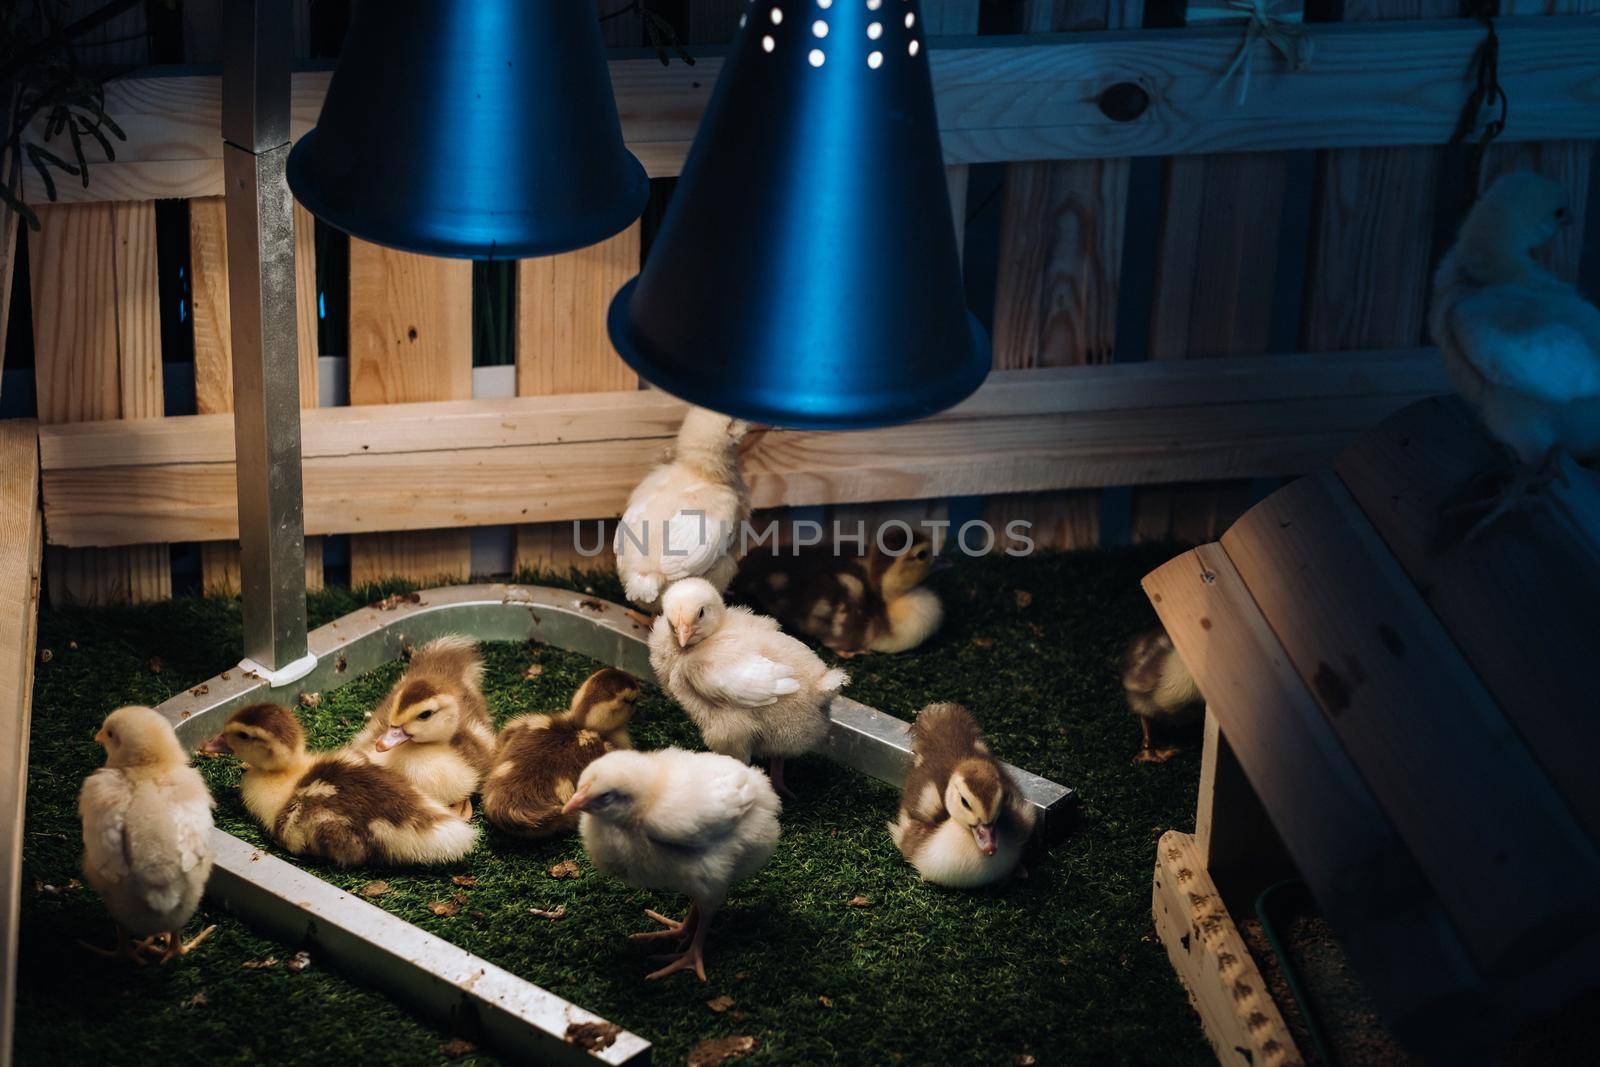 Small chickens and ducklings bask on the grass under a lamp in the yard by Lobachad